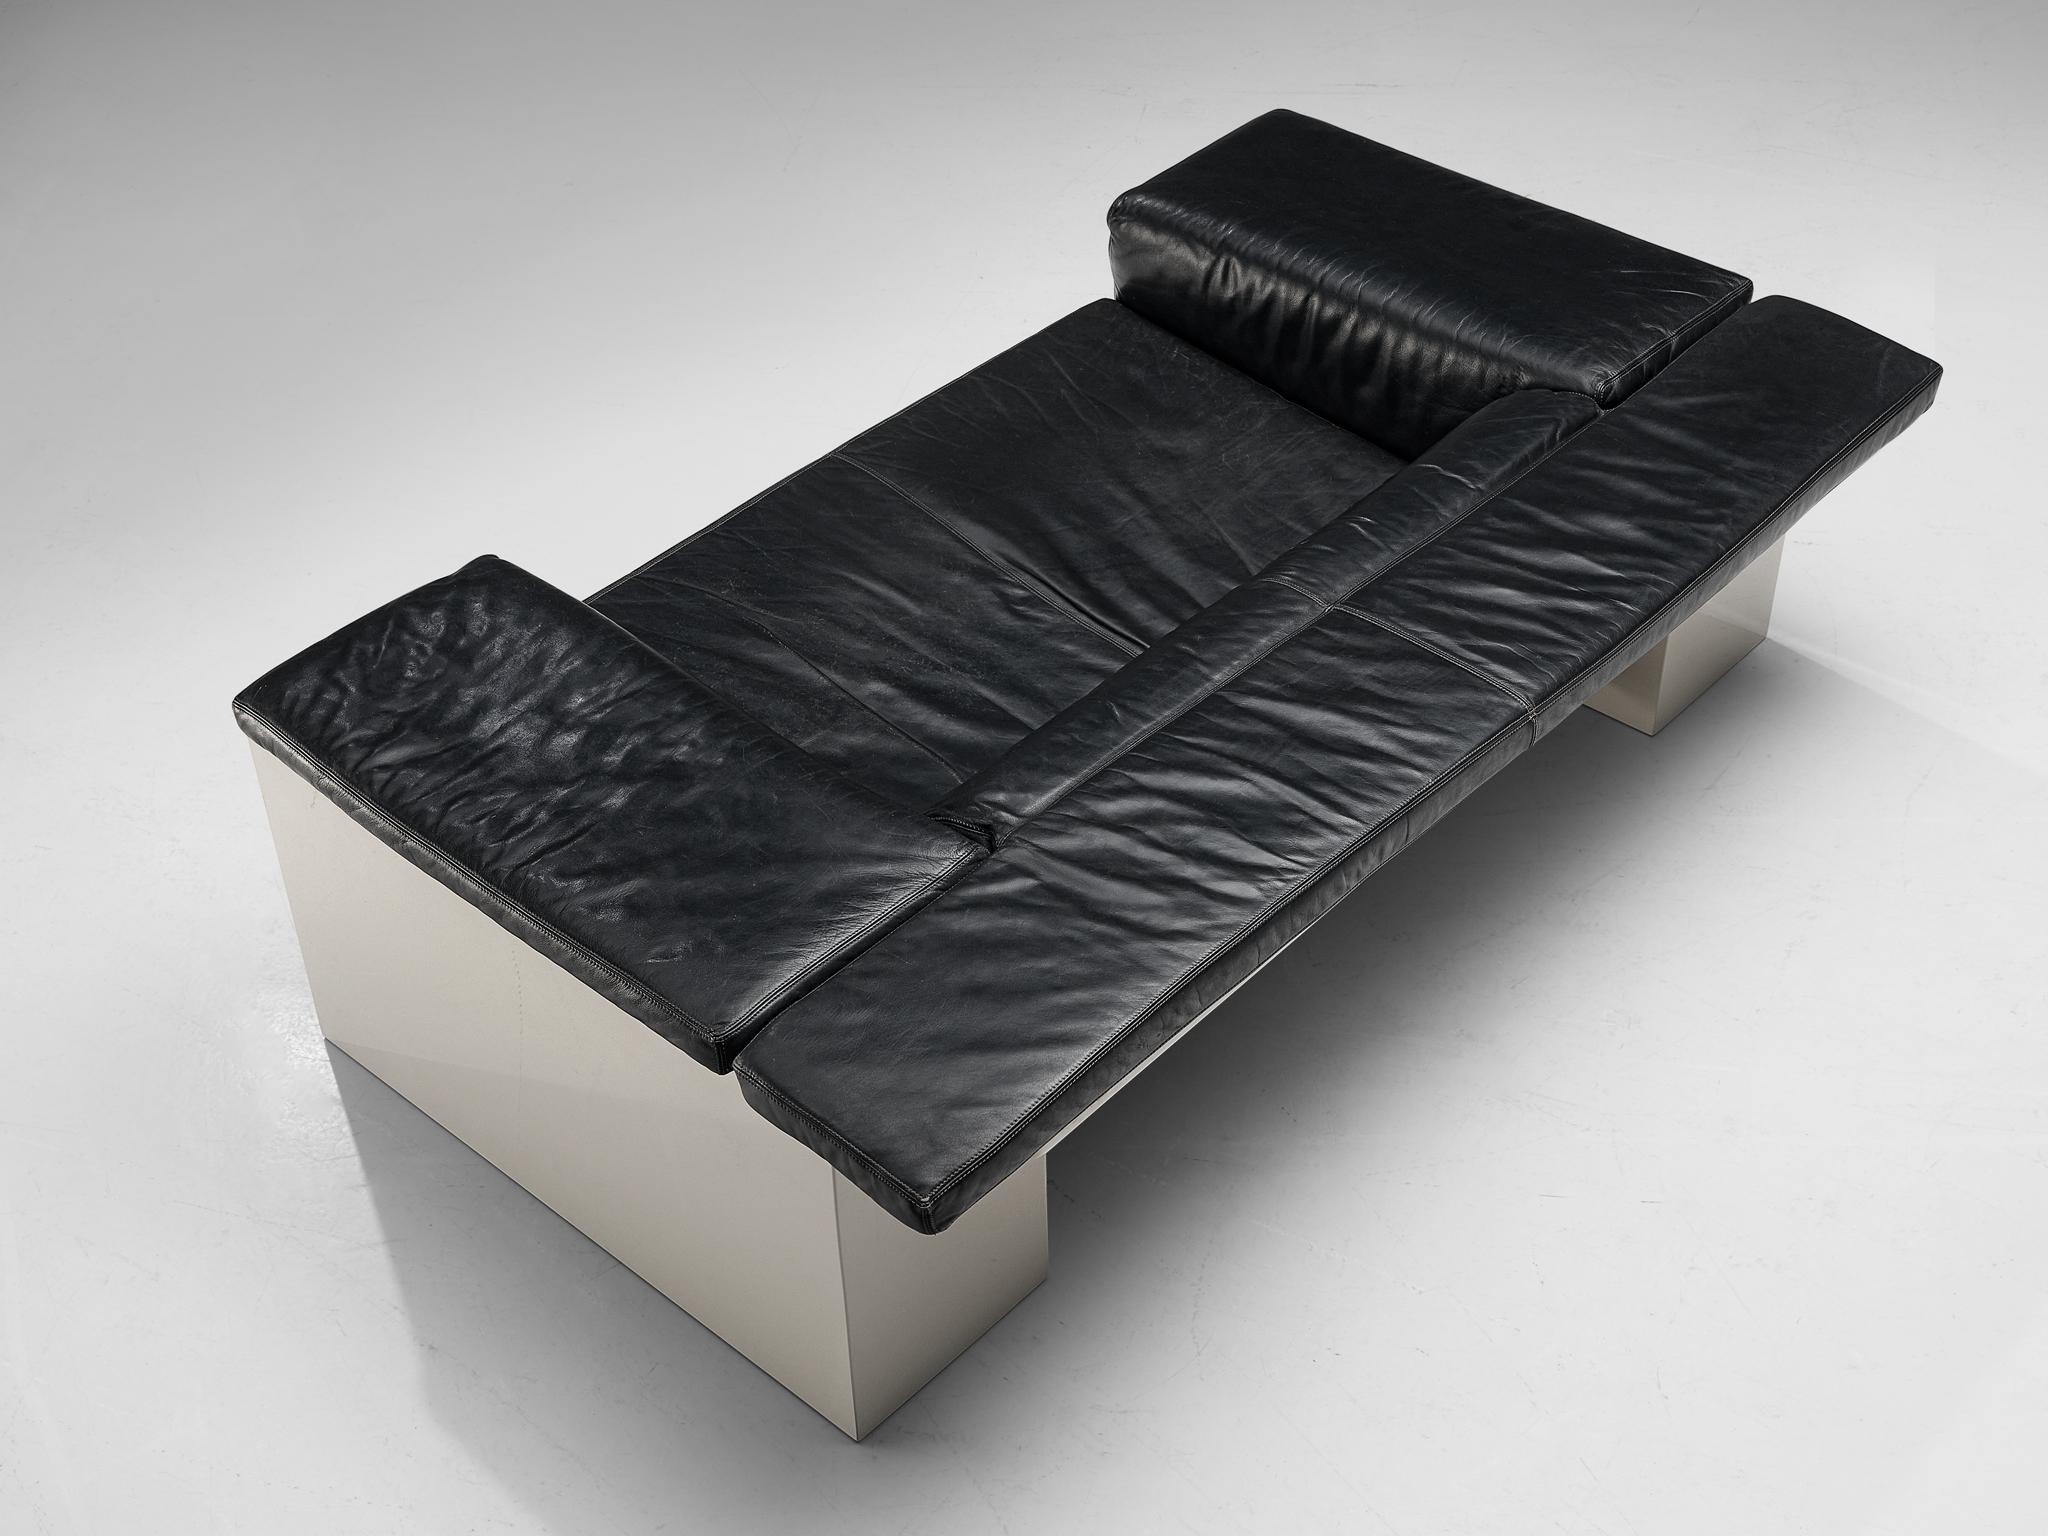 Cini Boeri for Knoll 'Brigadiere' Sofa in Black Leather  In Good Condition For Sale In Waalwijk, NL